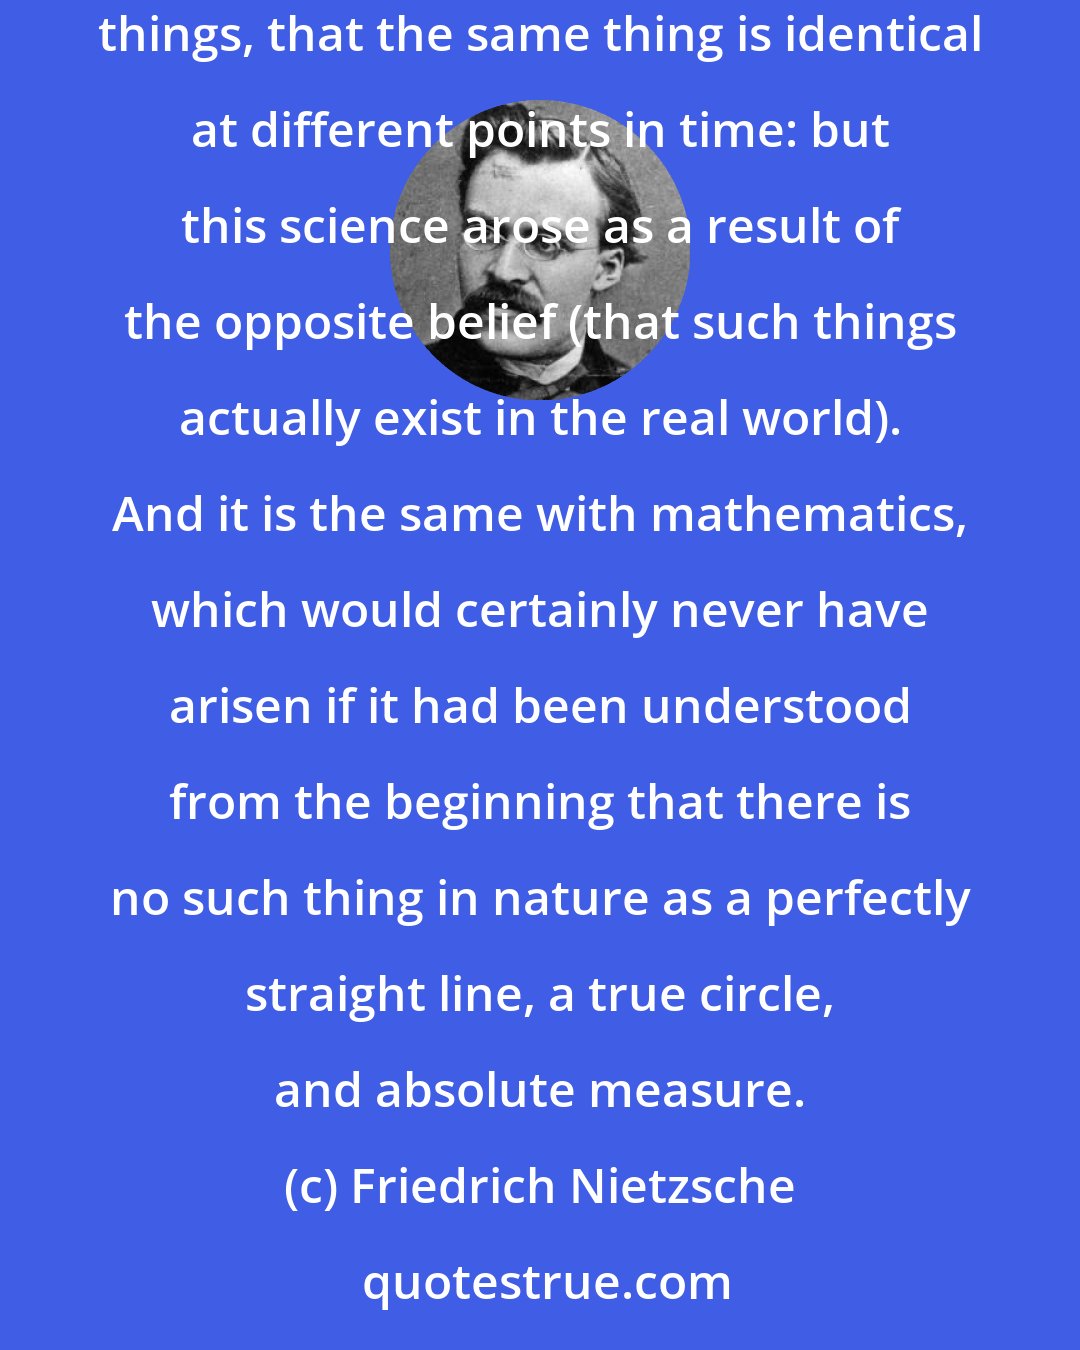 Friedrich Nietzsche: Logic, too, also rests on assumptions that do not correspond to anything in the real world, e.g., on the assumption that there areequal things, that the same thing is identical at different points in time: but this science arose as a result of the opposite belief (that such things actually exist in the real world). And it is the same with mathematics, which would certainly never have arisen if it had been understood from the beginning that there is no such thing in nature as a perfectly straight line, a true circle, and absolute measure.